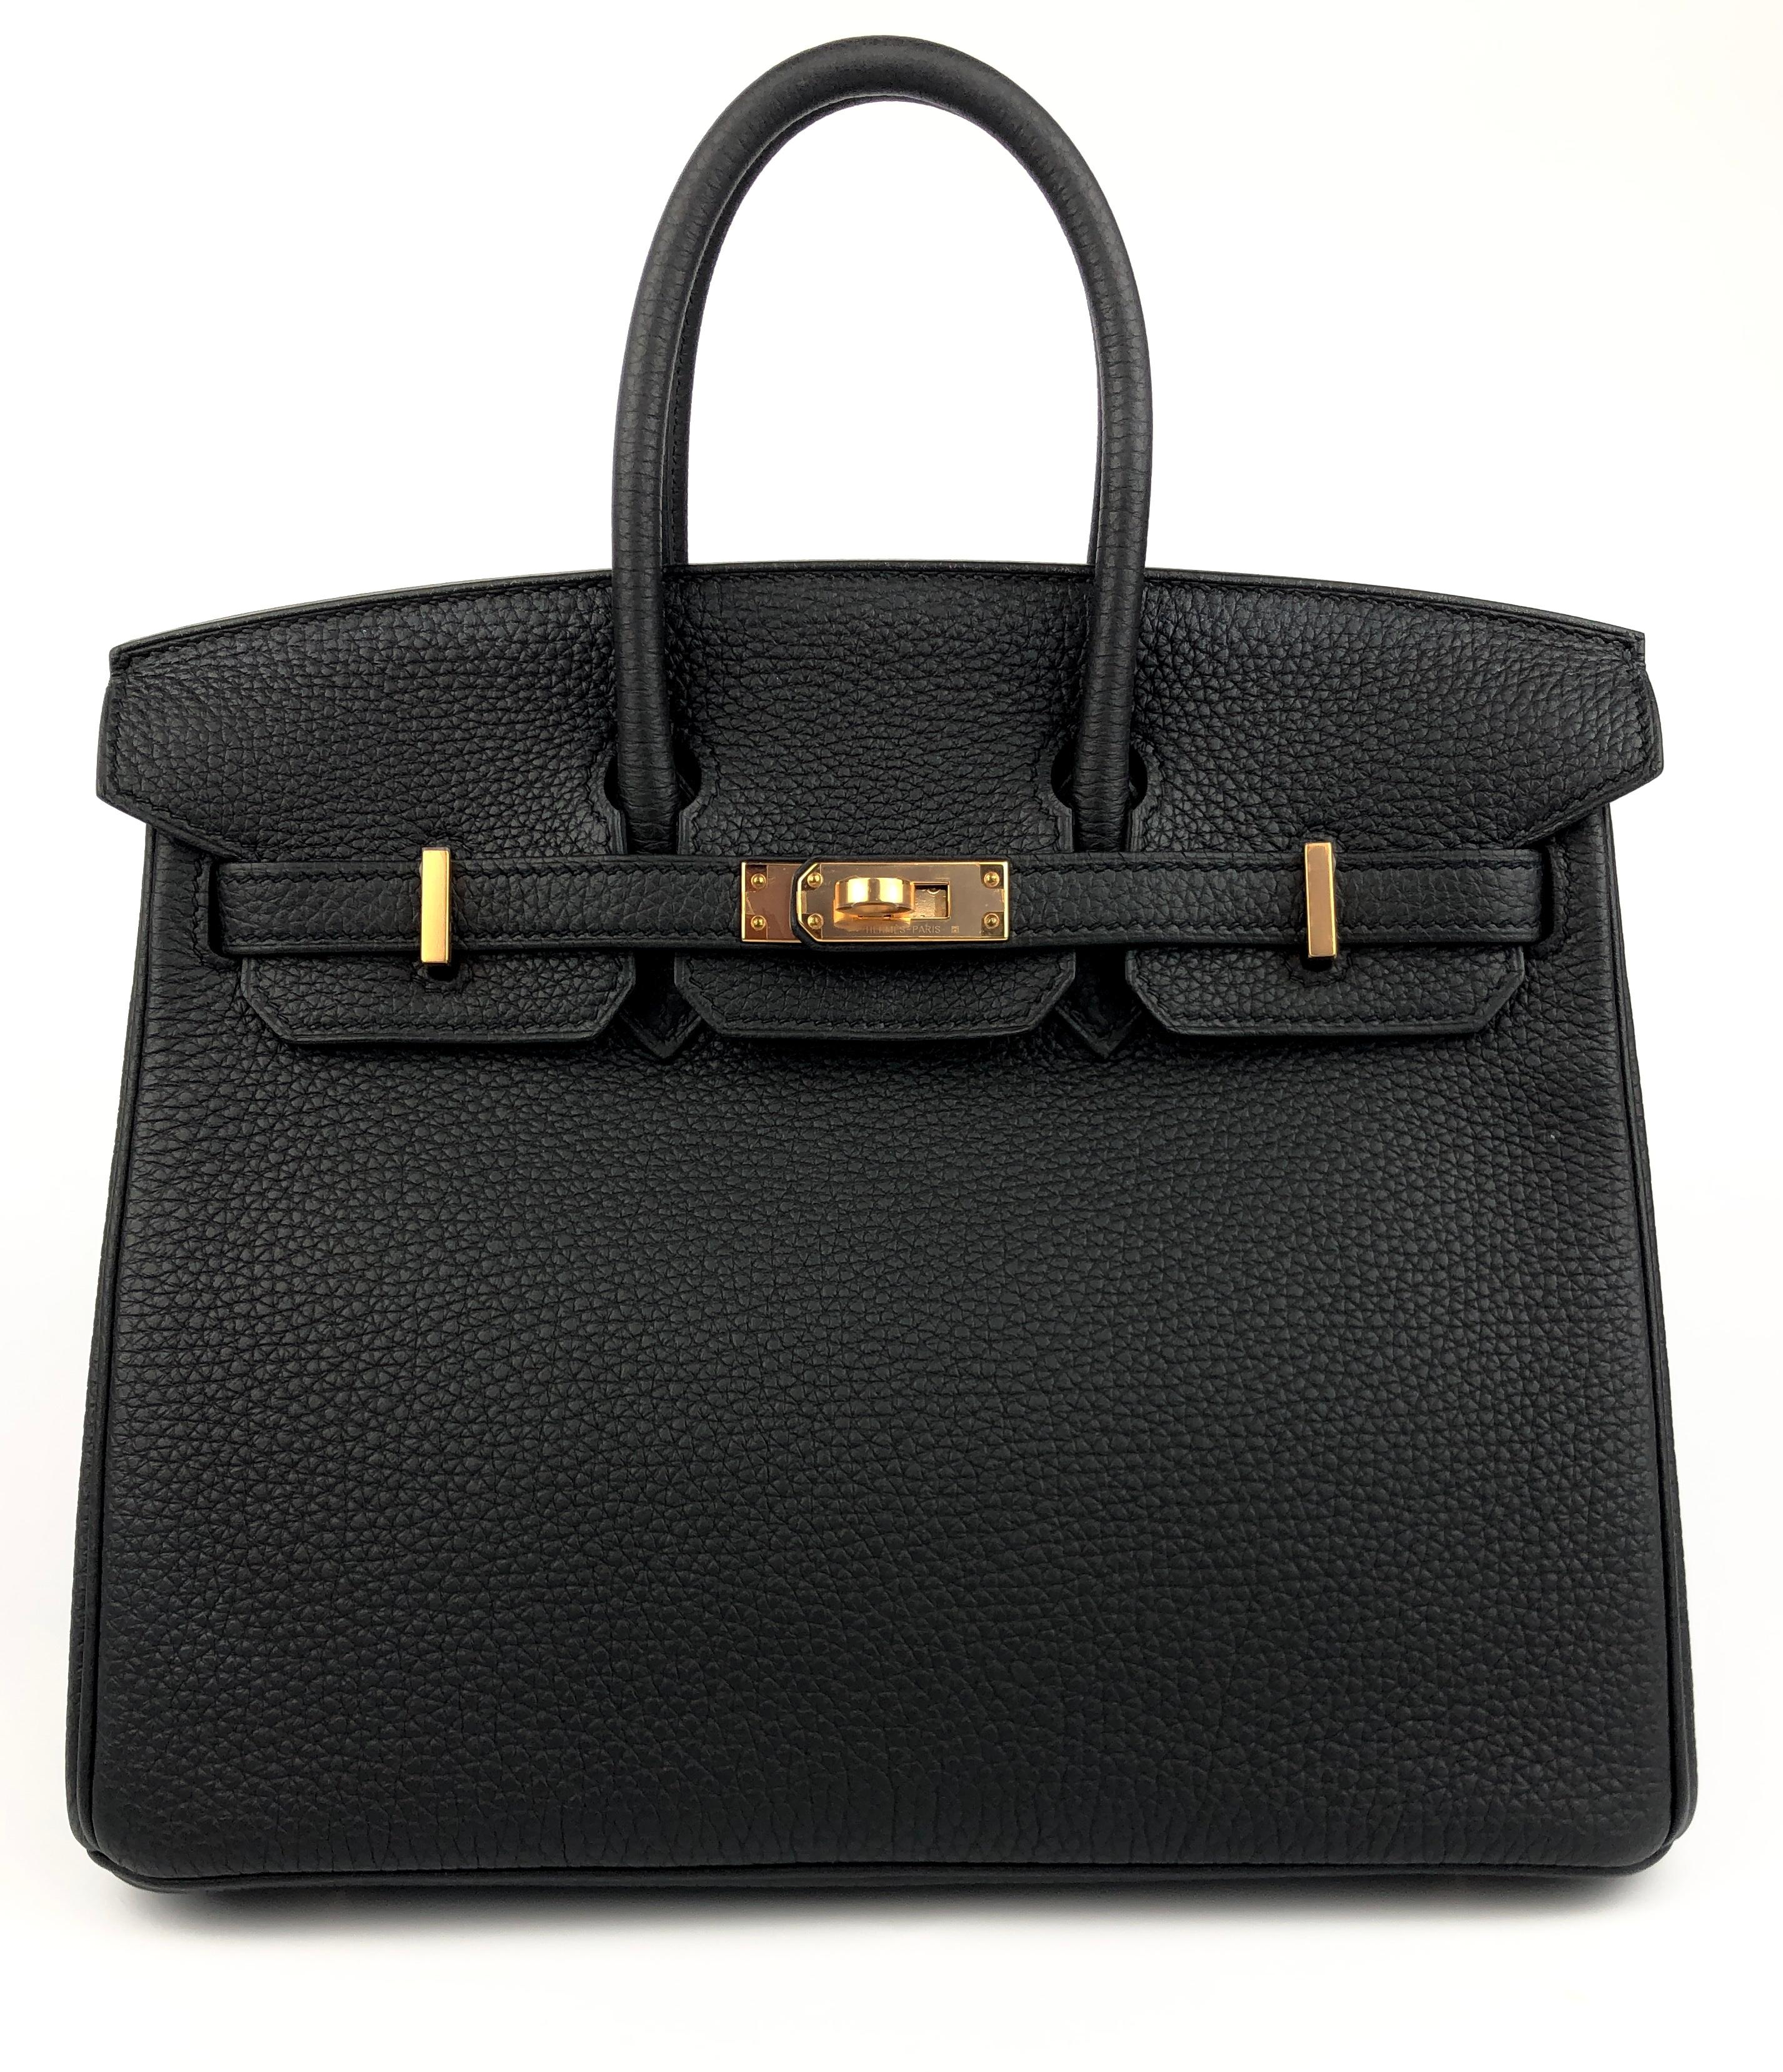 Absolutely Stunning and One The Most Coveted and Difficult to get Hermes Combos! As New Hermes Birkin 25 Black Noir Togo Leather complimented by Rose Gold Hardware. D Stamp 2019.


Shop With Confidence from Lux Addicts. Authenticity Guaranteed! 

